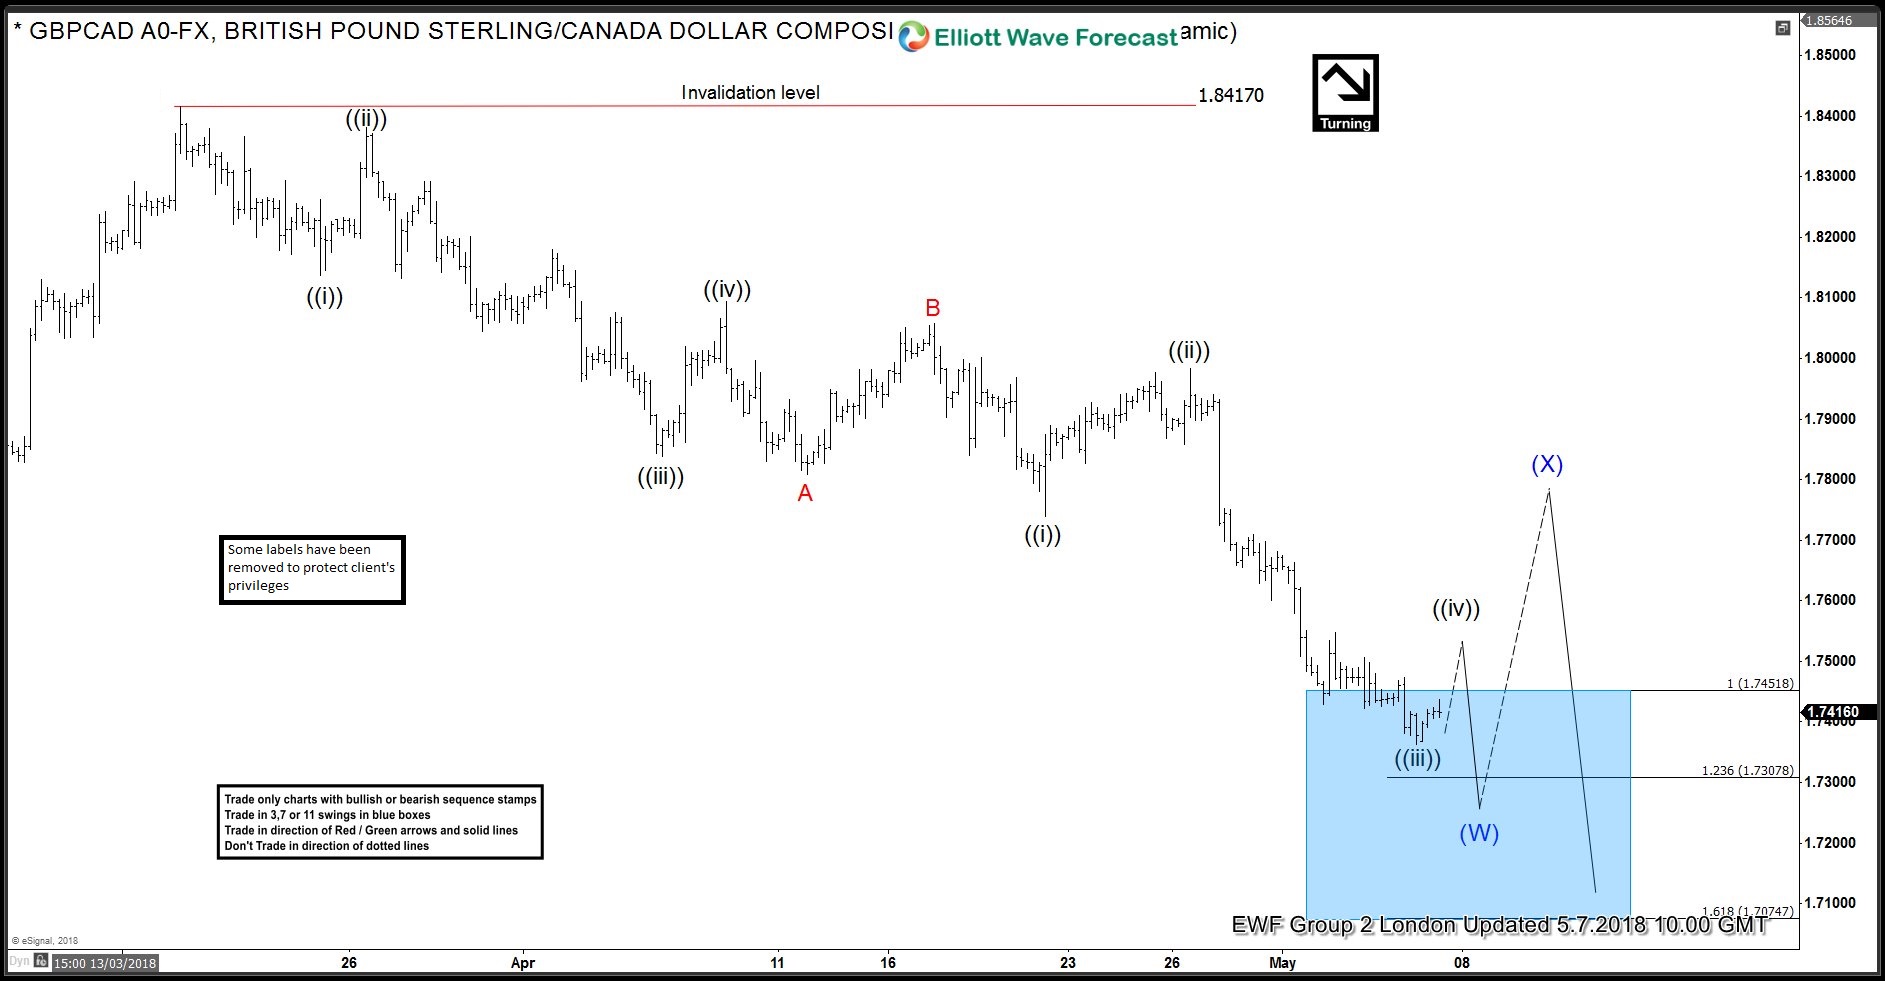 GBPCAD Elliott Wave View: Calling The Bounce Soon